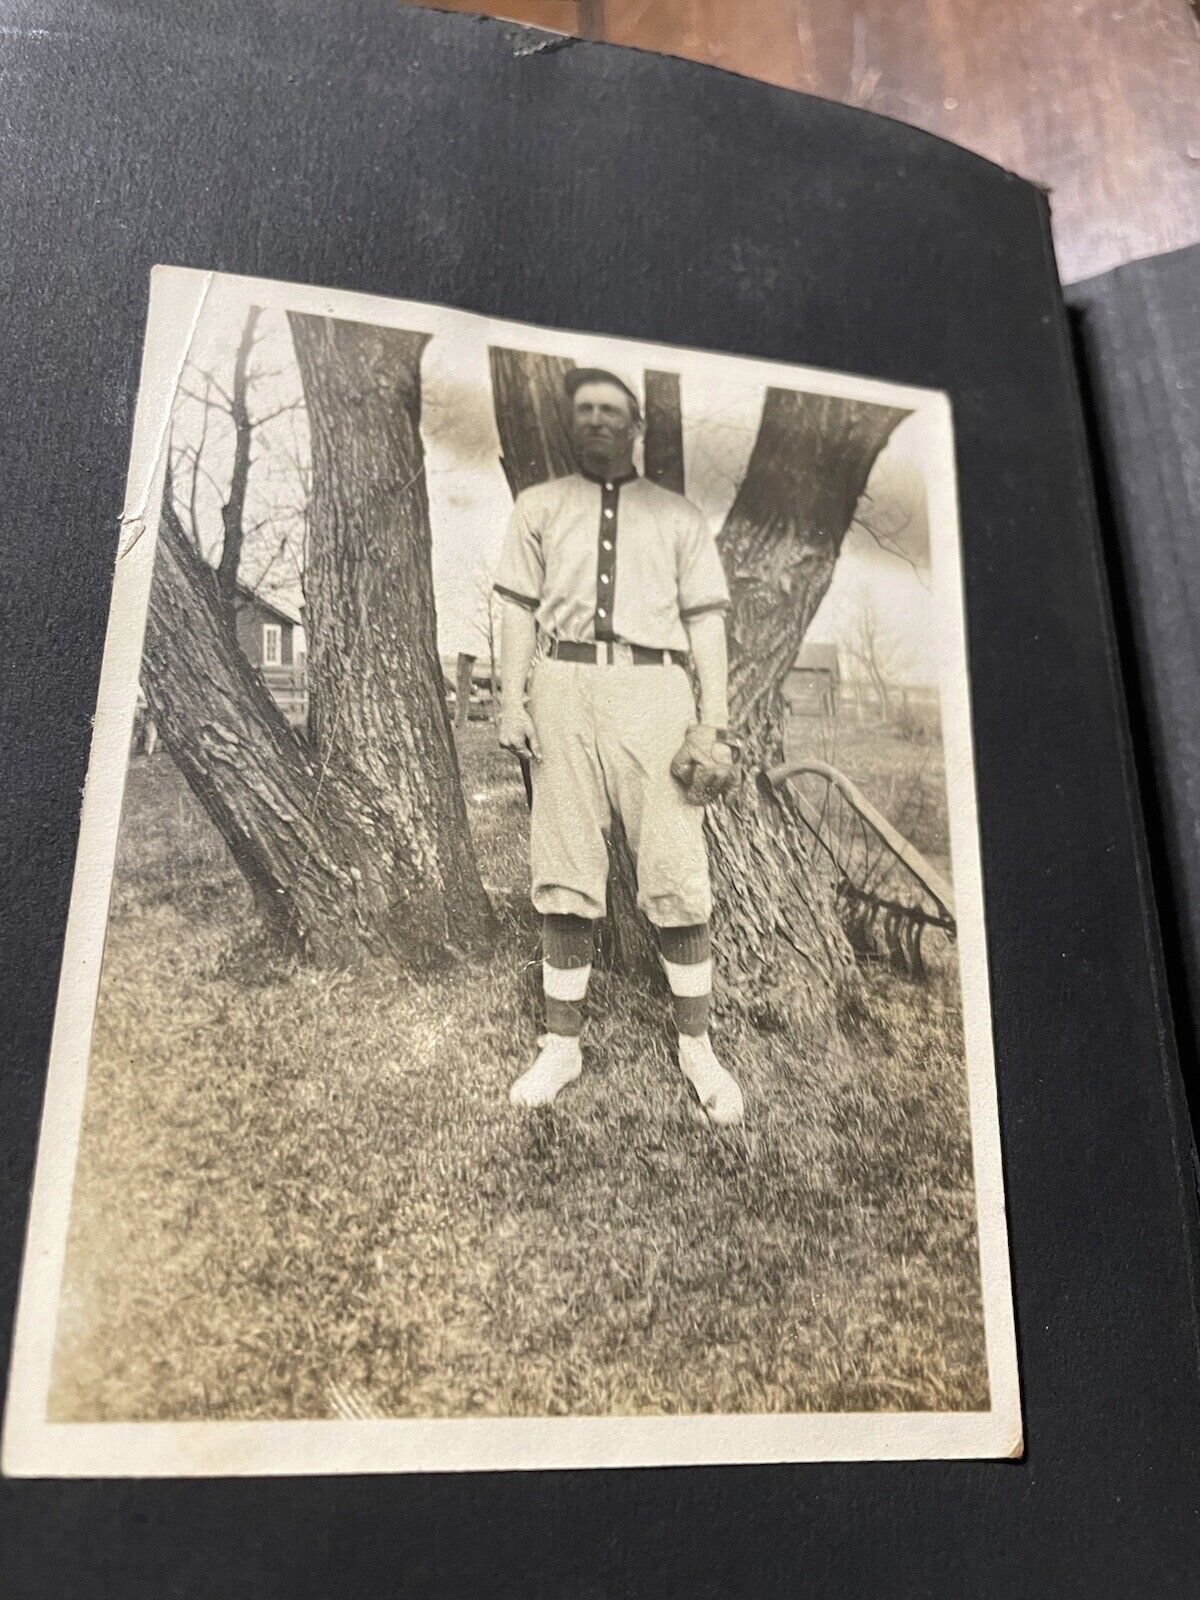 Antique Baseball Player  Photograph Early 1900s From Scrapbook